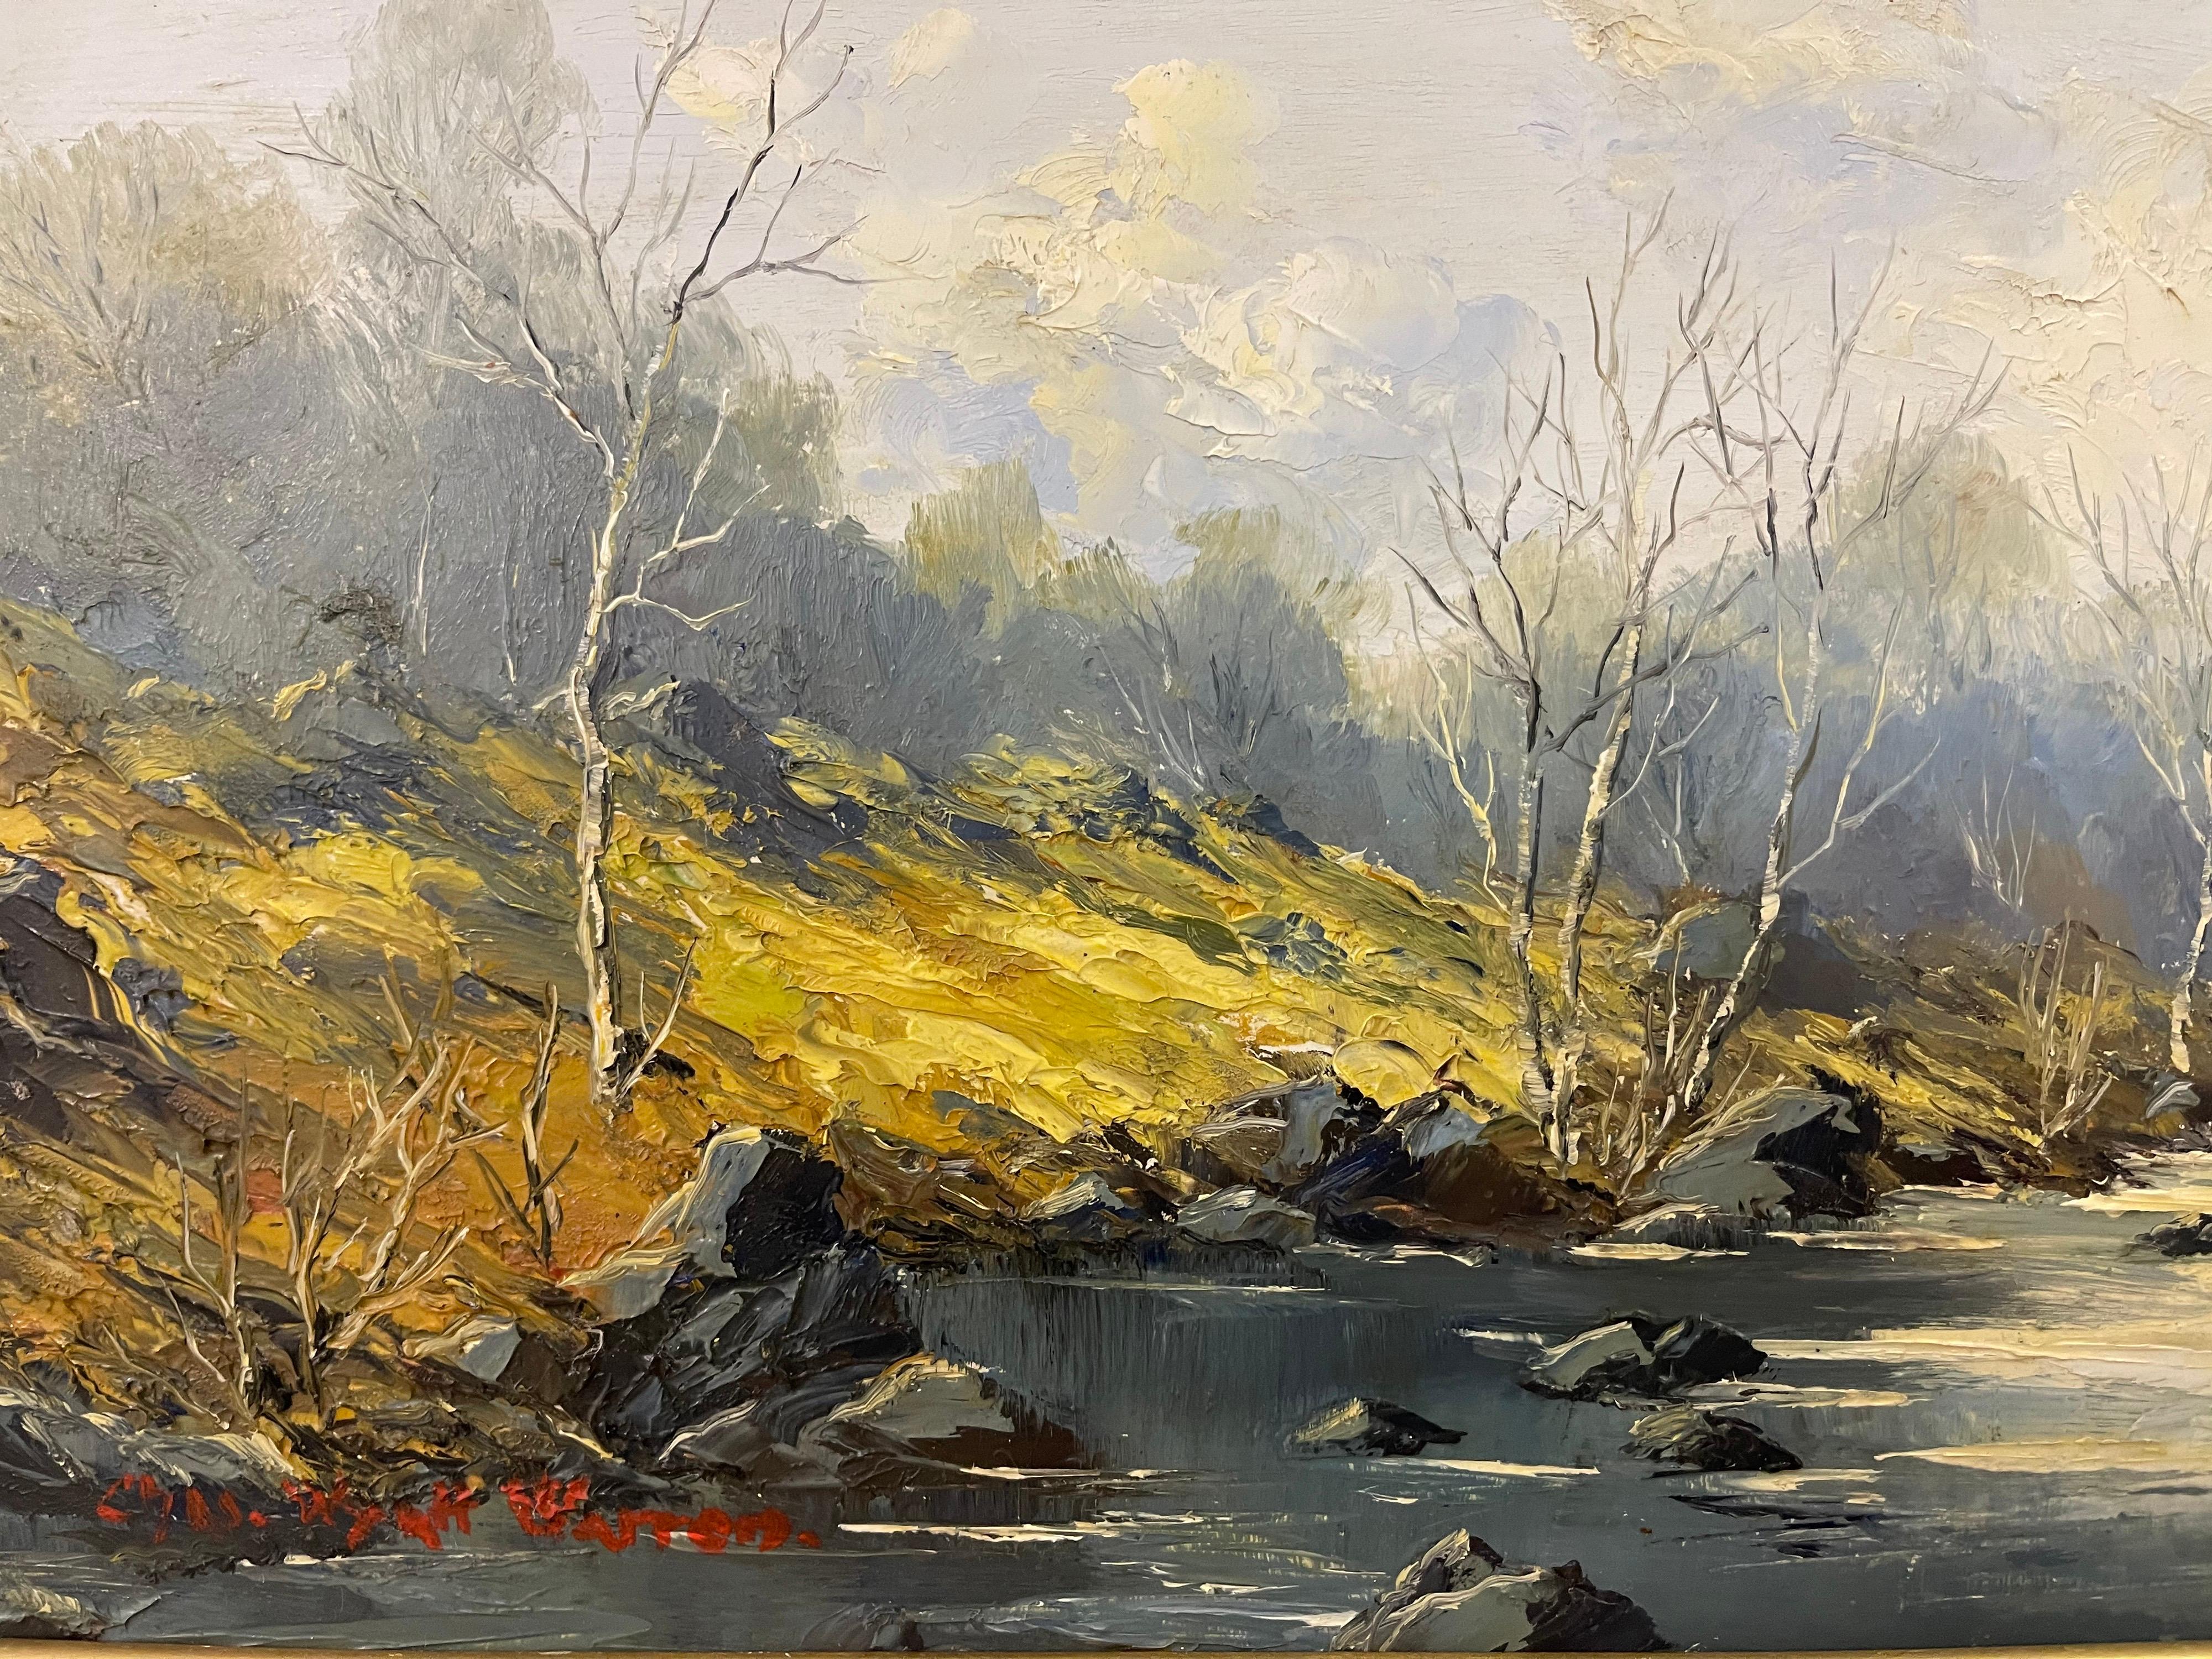 Welsh River Landscape with Birch Trees Oil Painting by British Impasto Artist Charles Wyatt Warren (1908-1993)

Art measures 21 x 9 inches
Frame measures 25 x 13 inches

Charles Wyatt Warren (1908-1993) was a self-taught painter and an enthusiastic